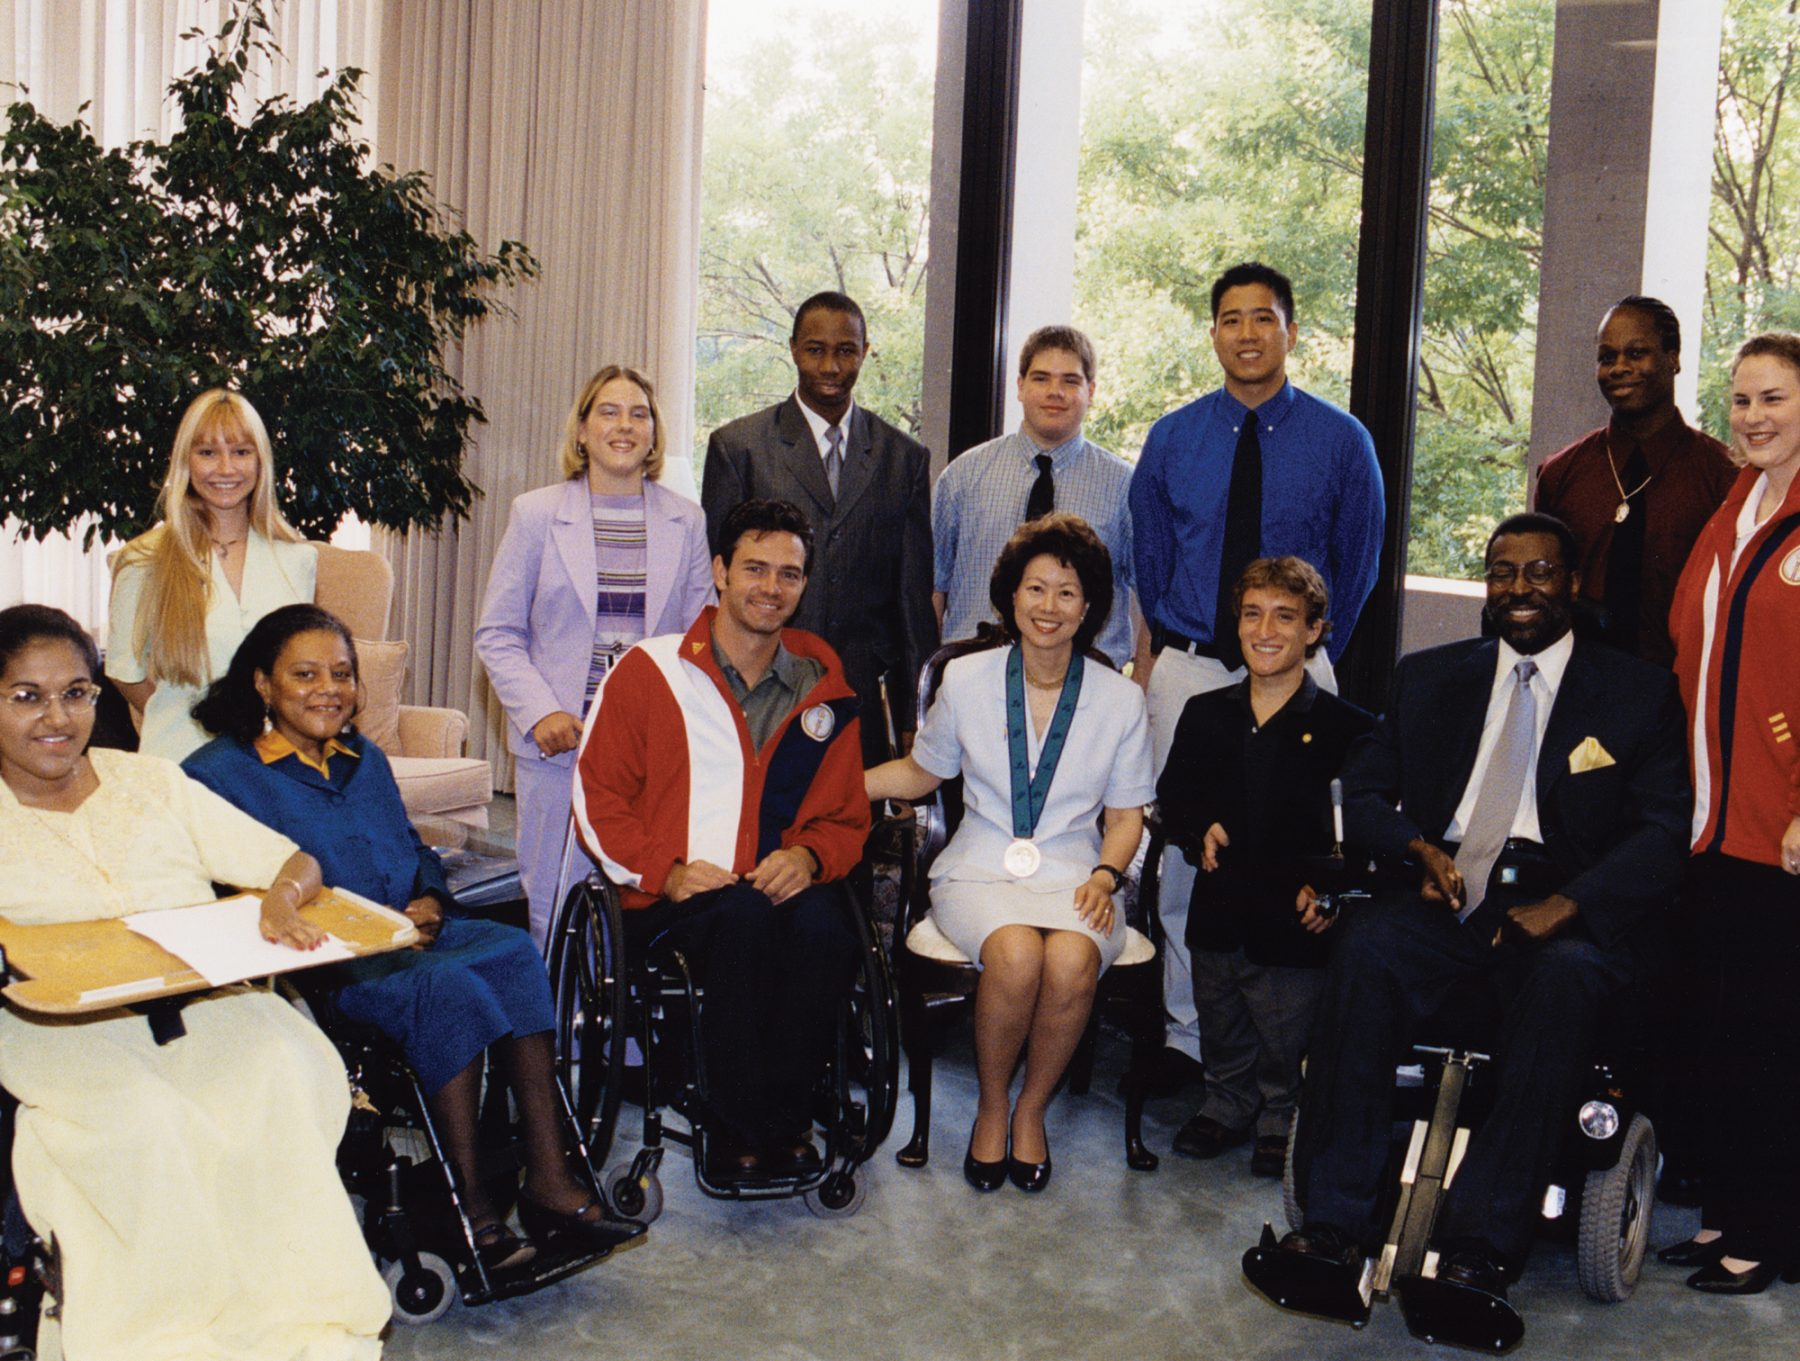 Secretary Elaine Chao meeting with Americans with disabilities on how her department can improve employment in this community.